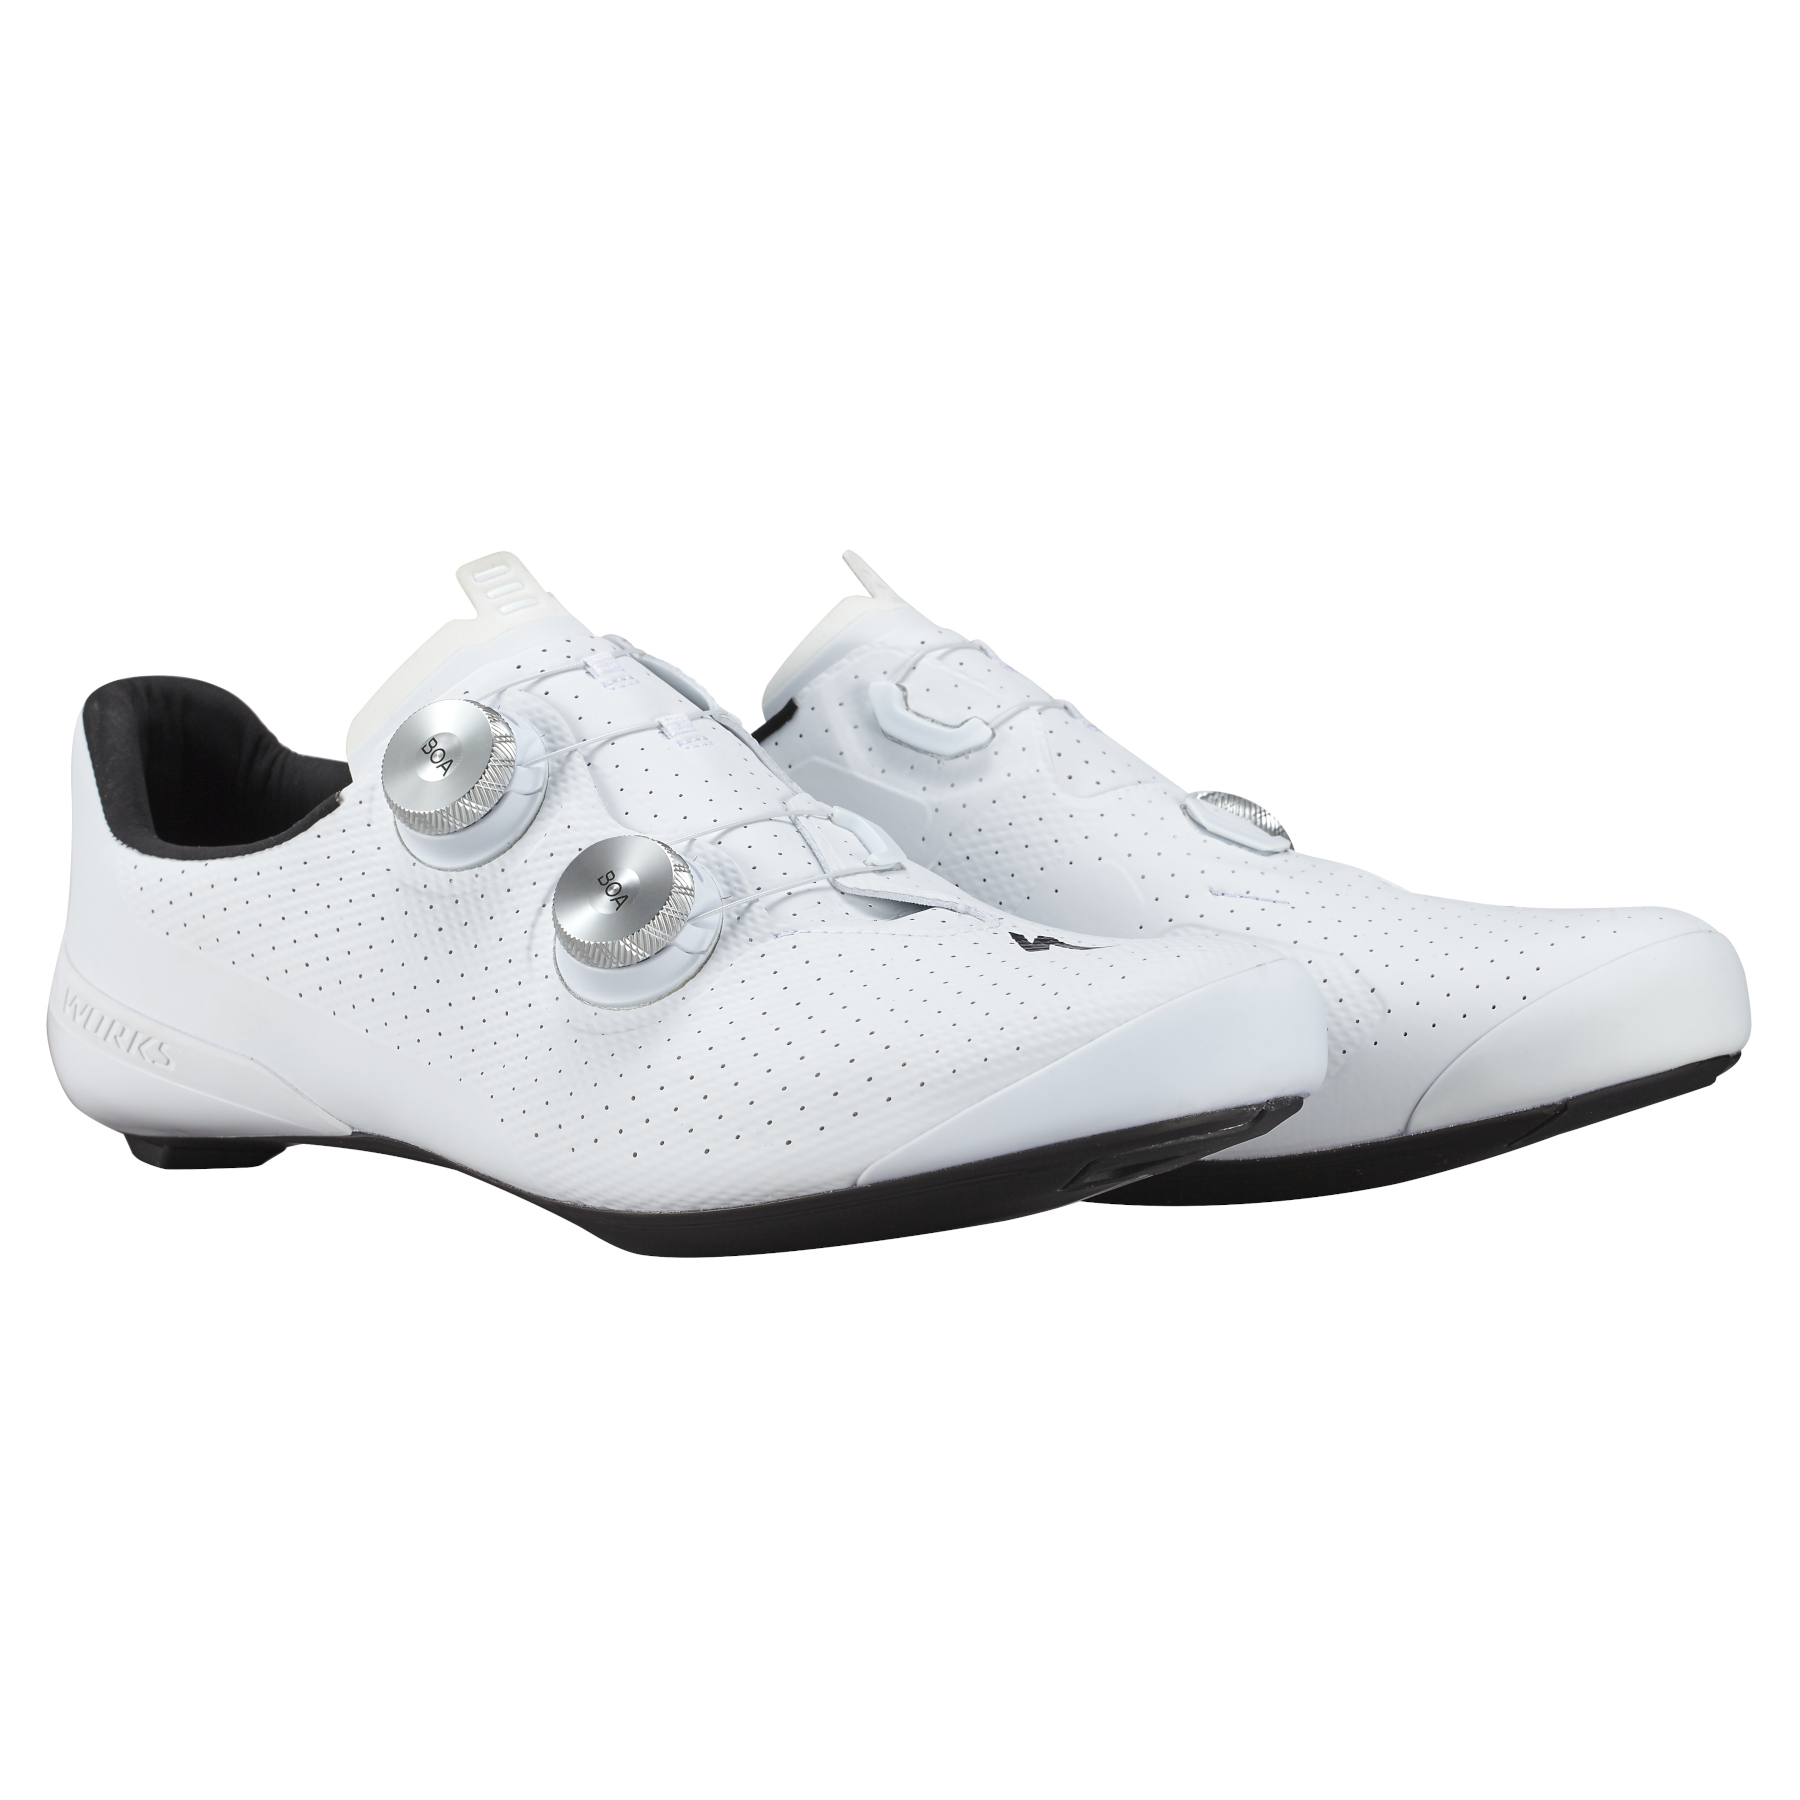 Picture of Specialized S-Works Torch Road Cycling Shoes - Standard | White